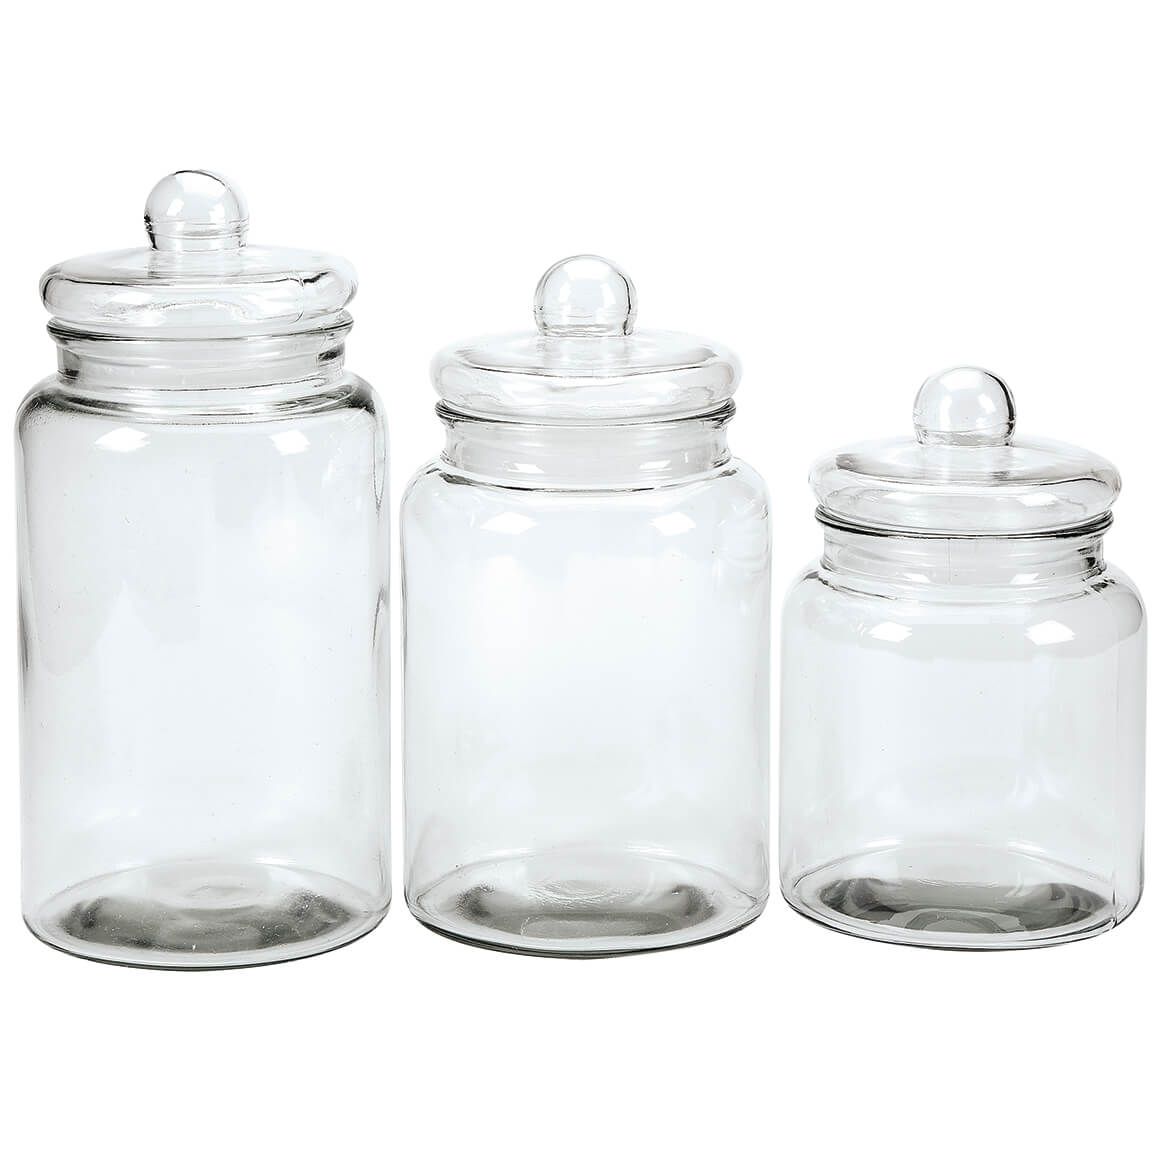 Clear Glass Apothecary Jars, Set of 3 + '-' + 368671